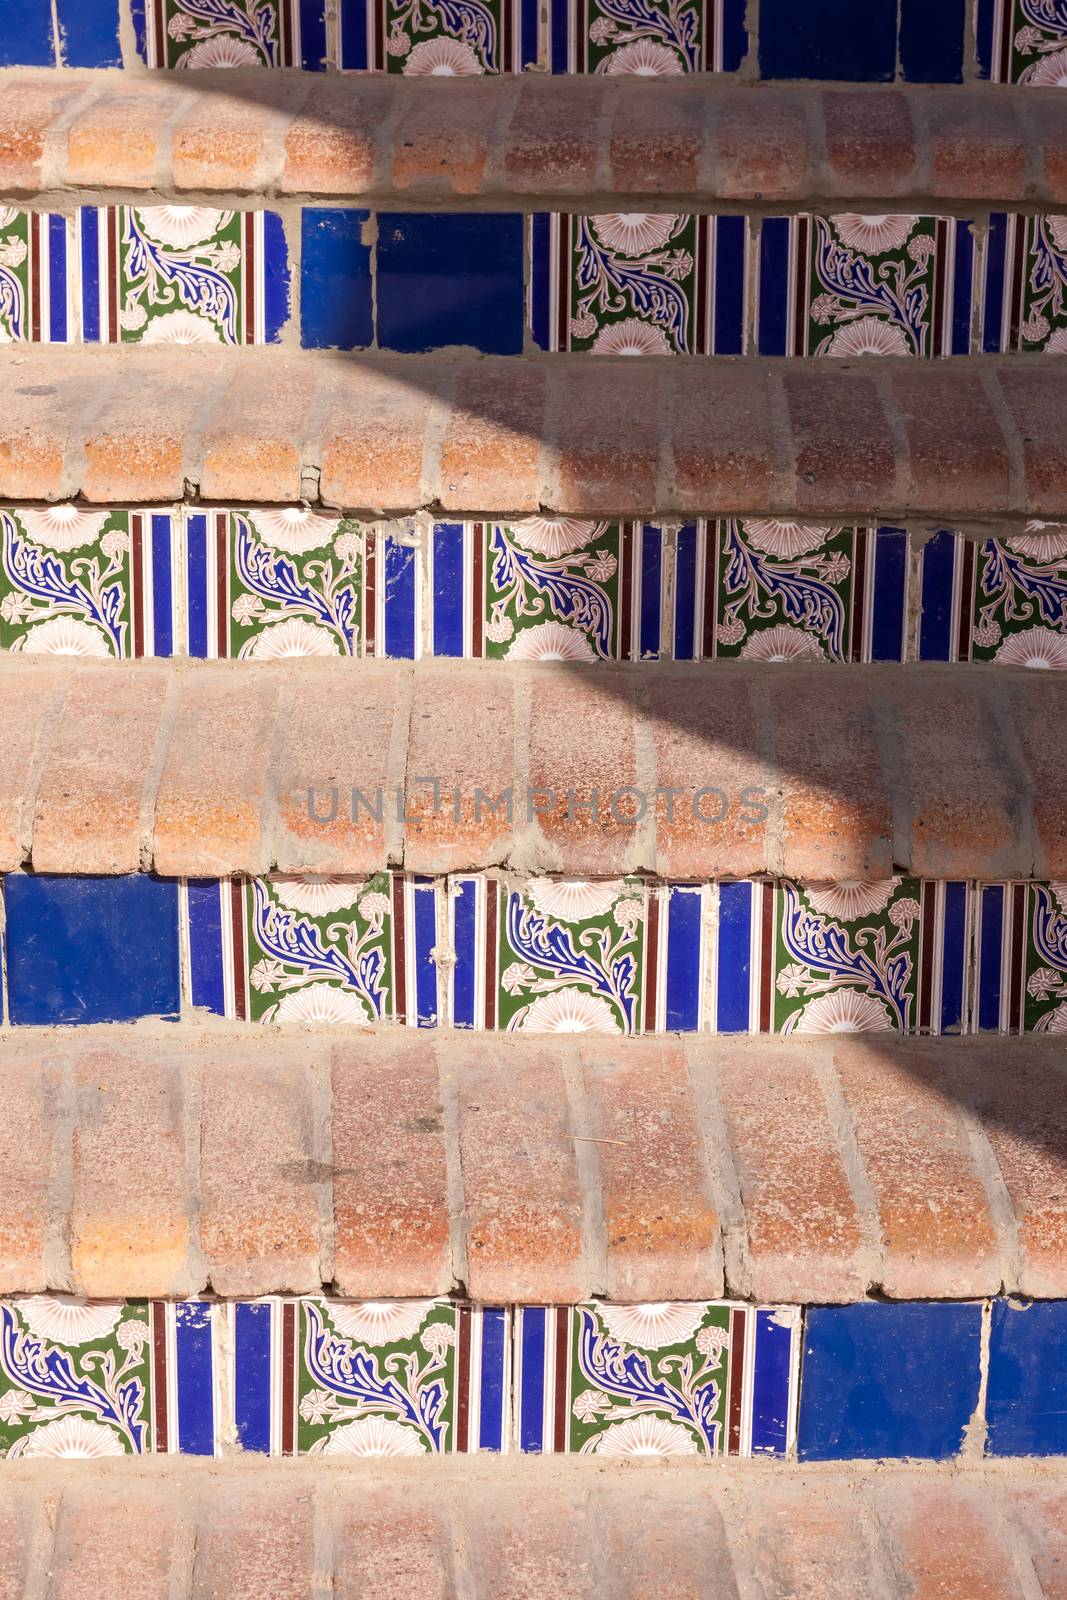 Staircase with patterned ceramic tiles in Egypt